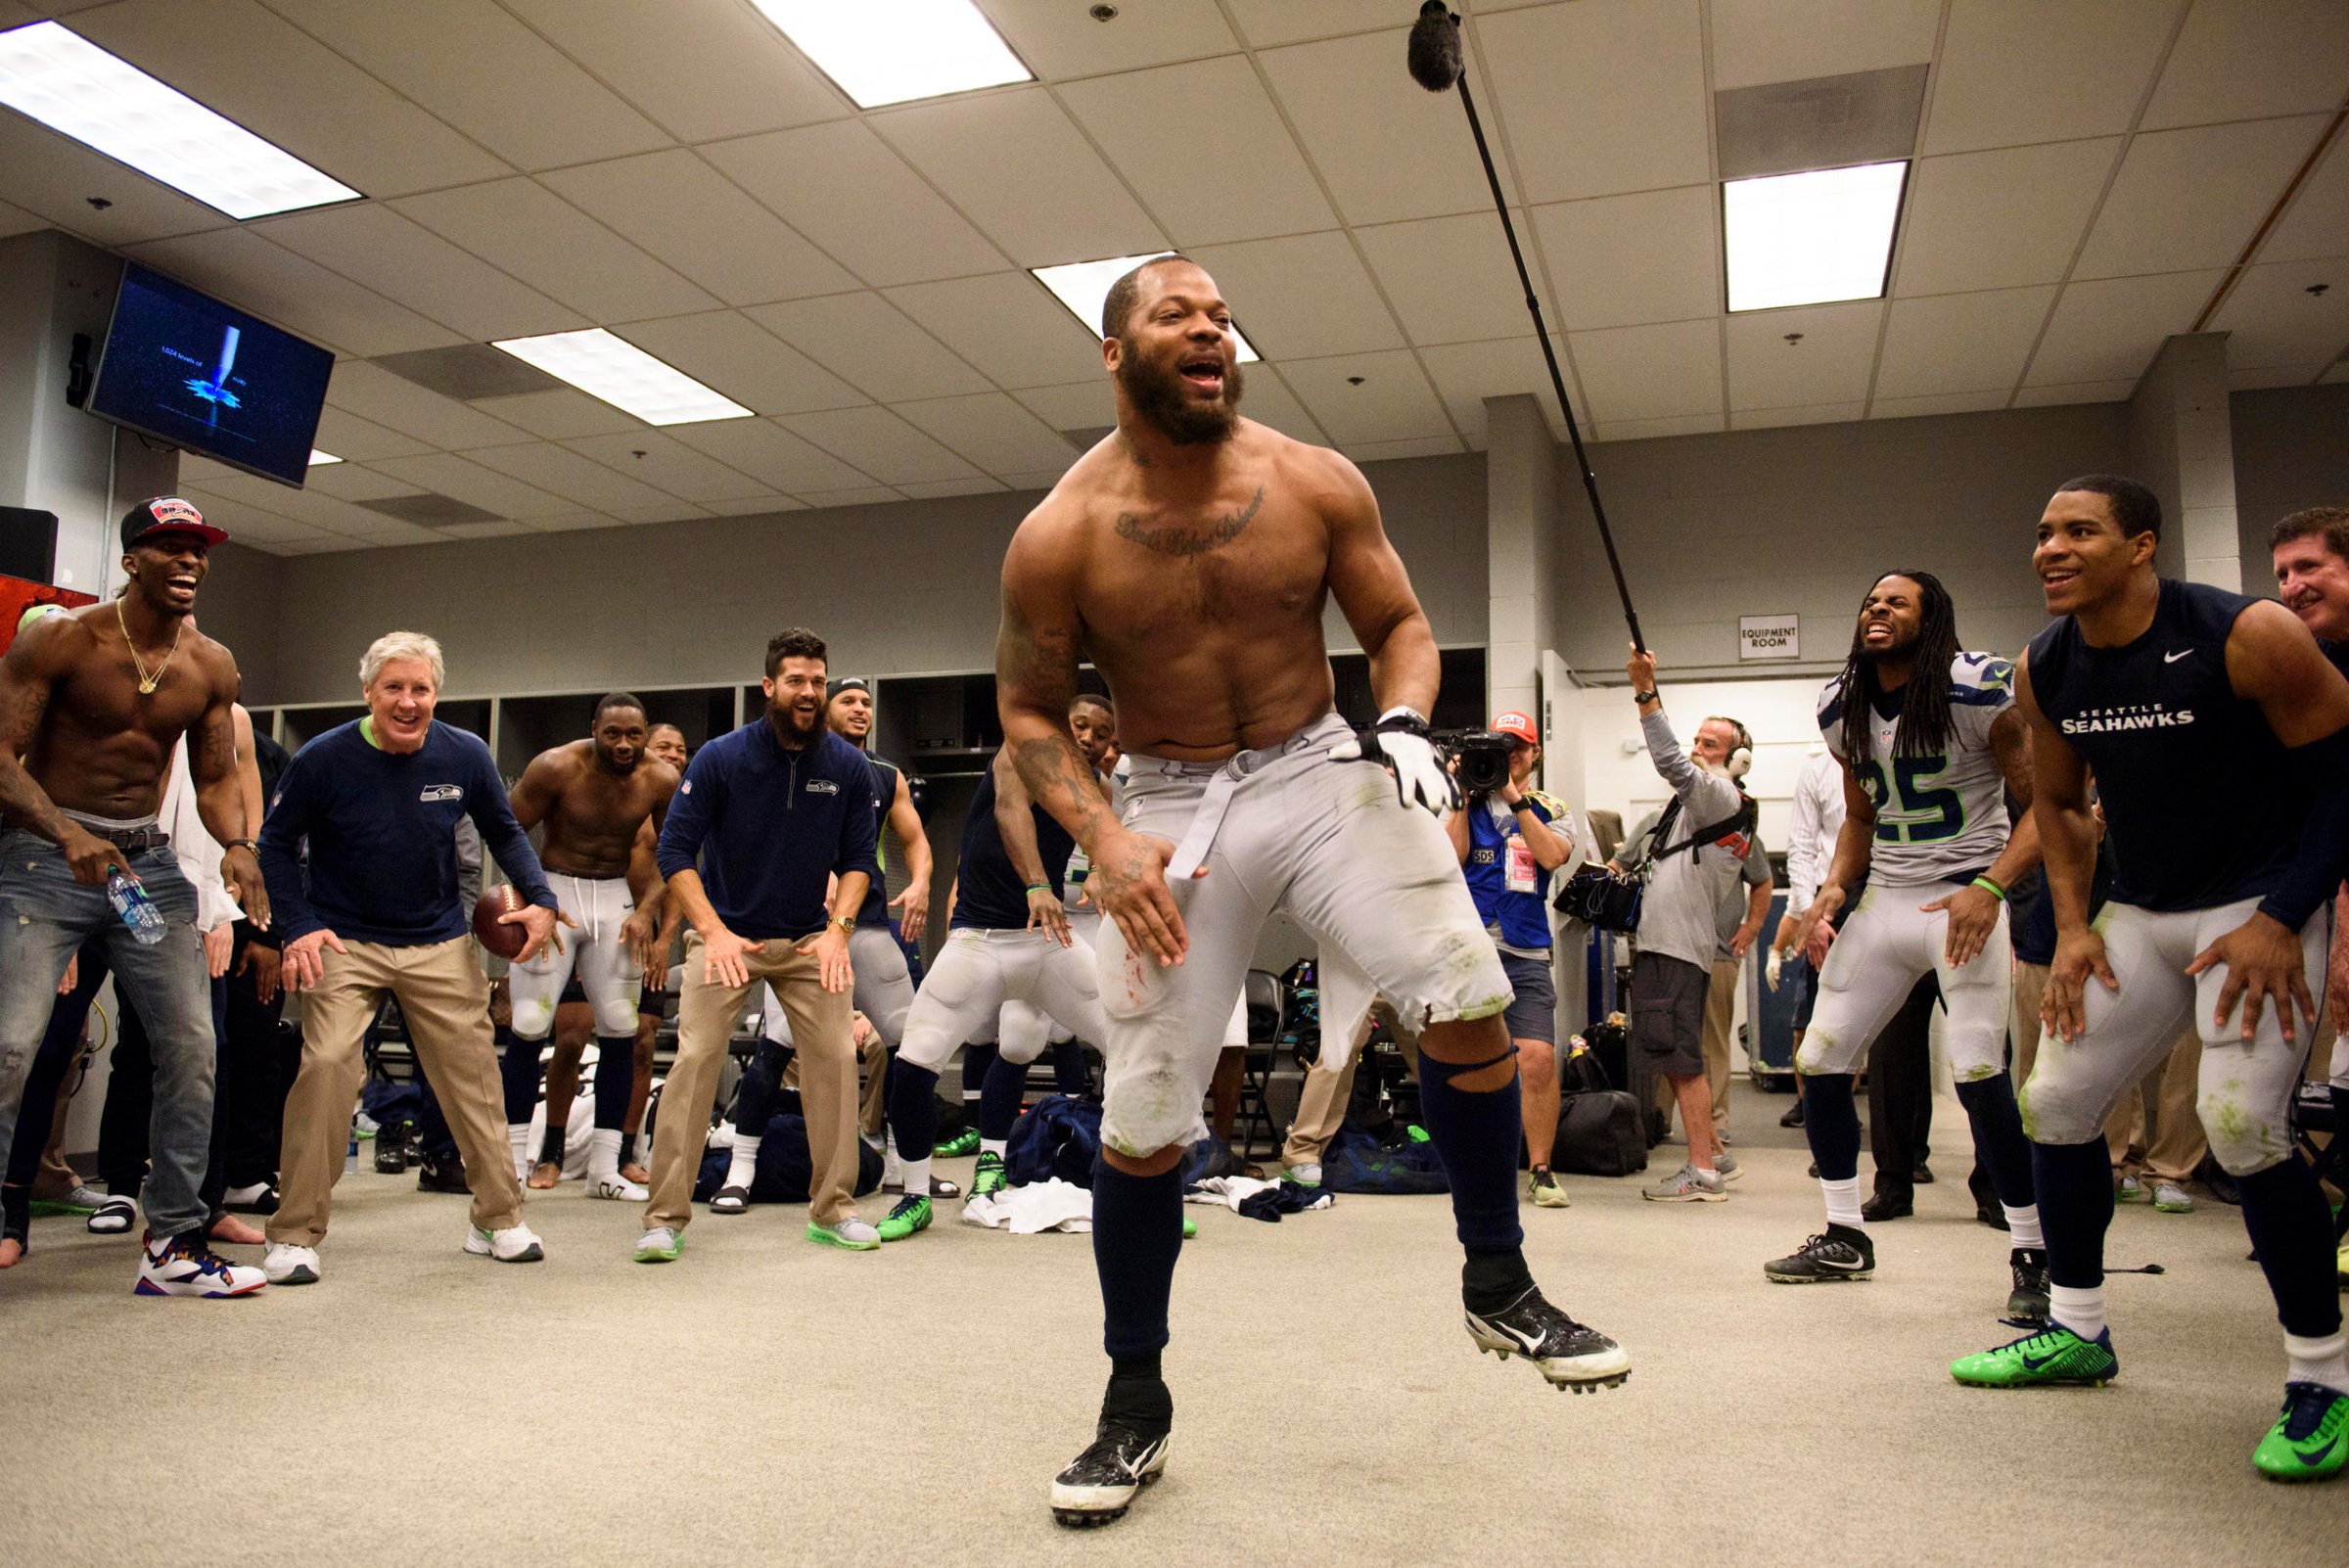 Defensive end Michael Bennett leads the team in the now-traditional post-victory dance in the locker room.